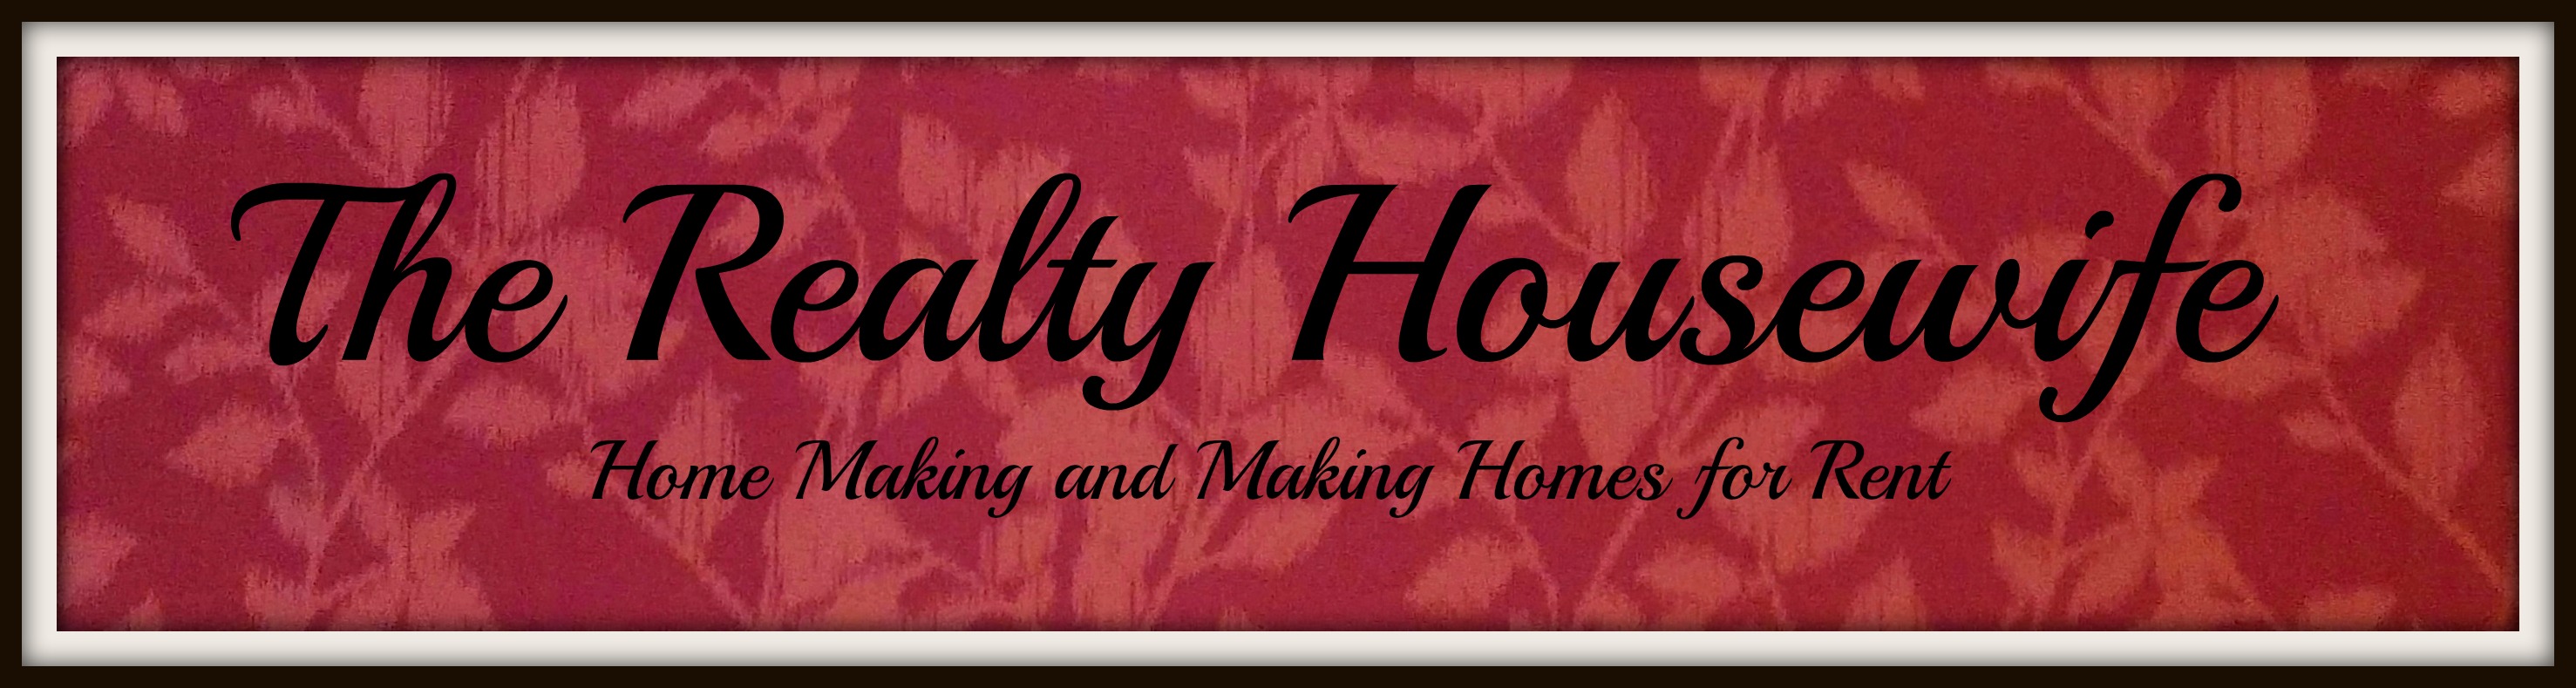 The Realty Housewife